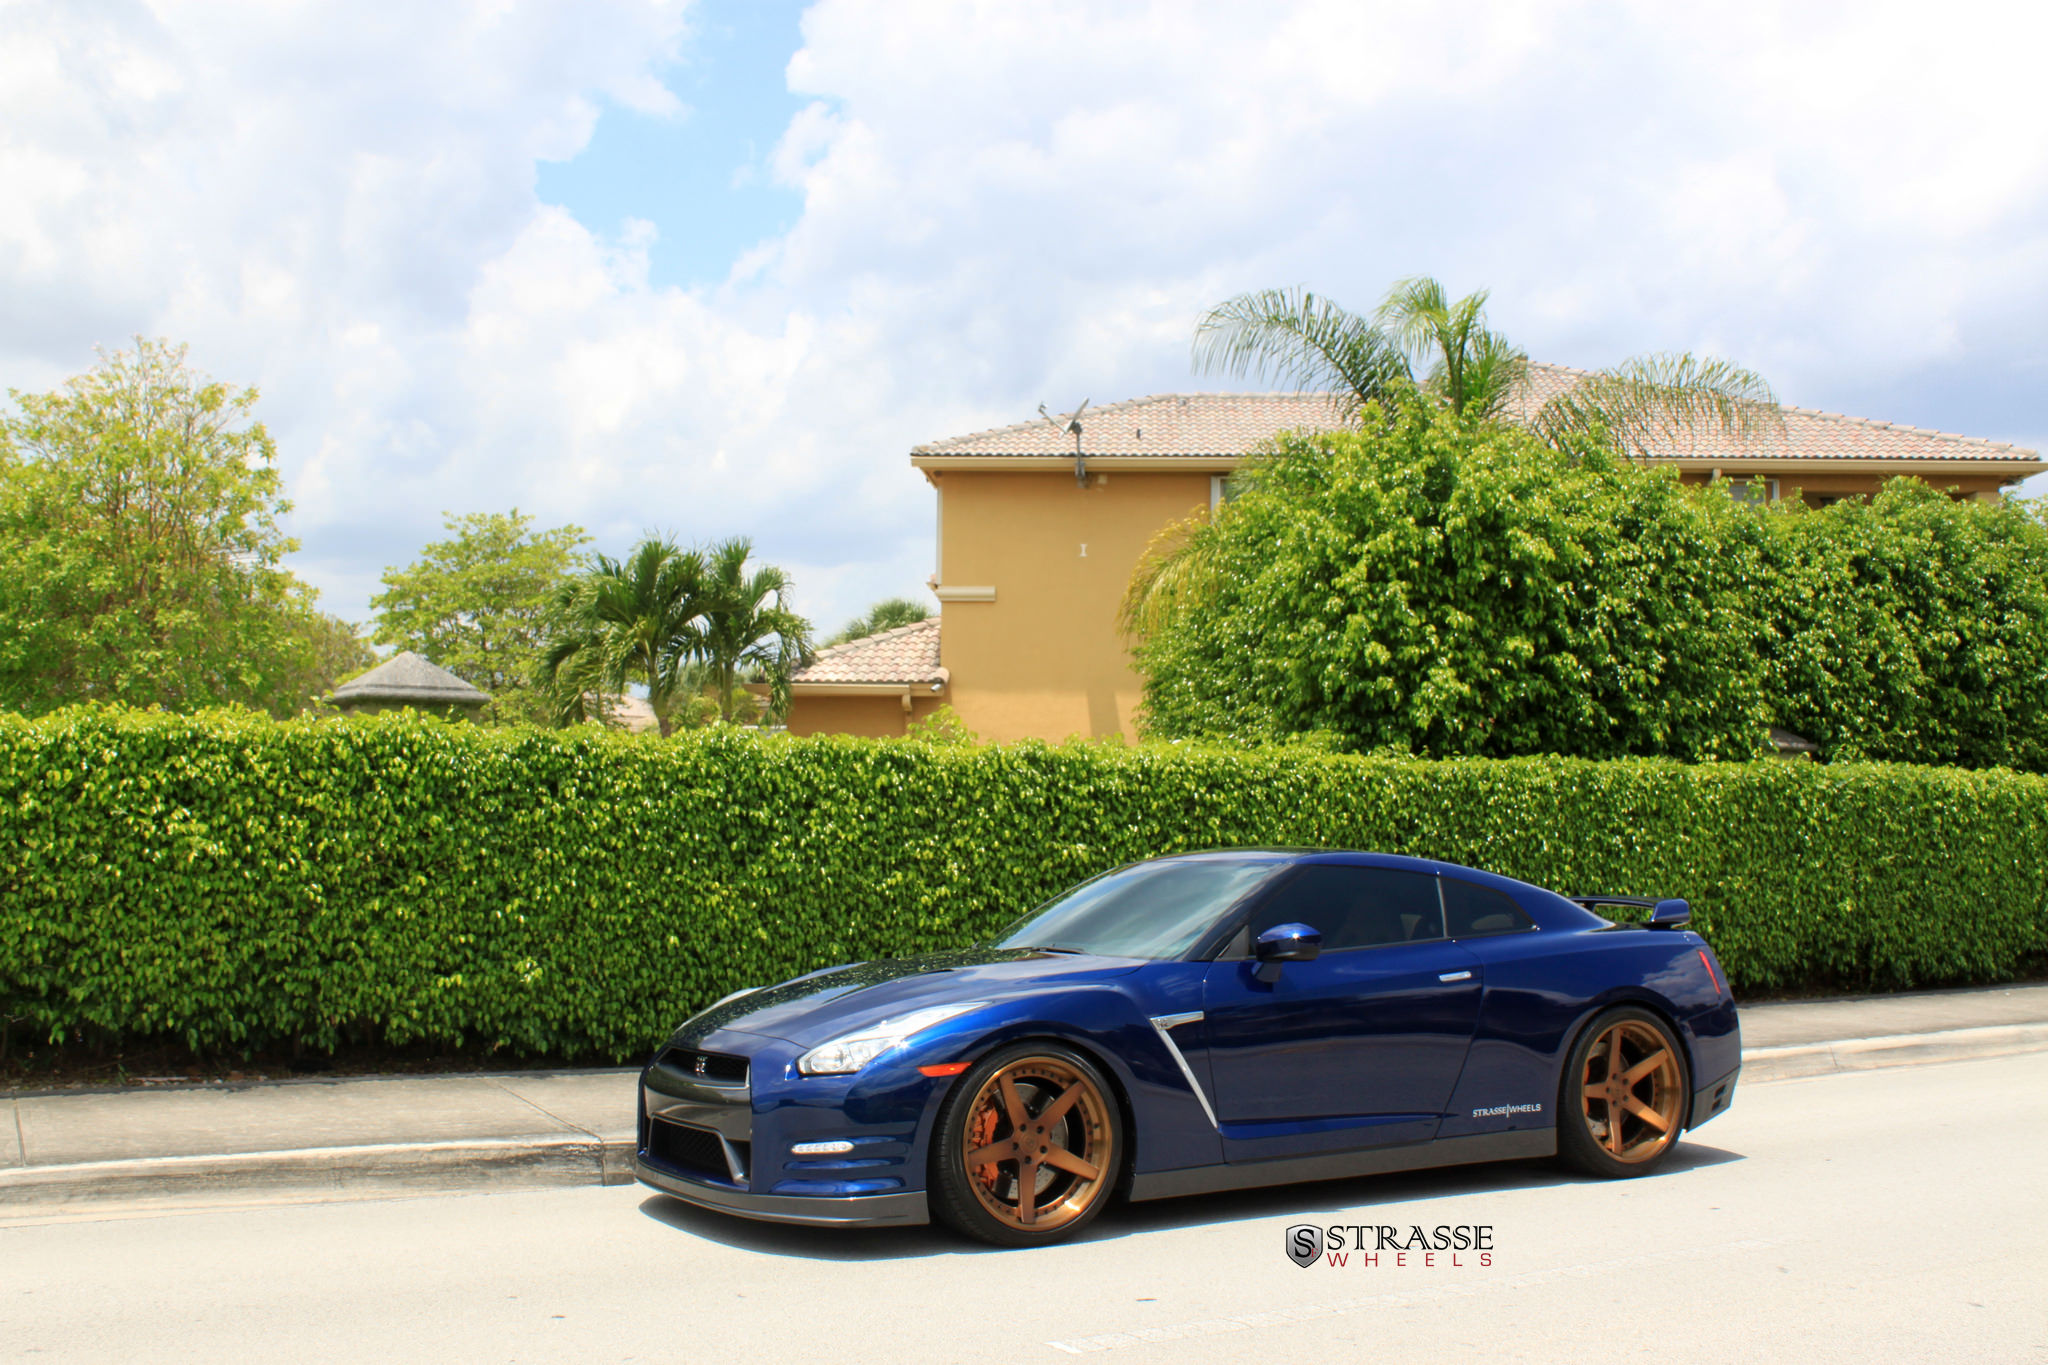 MPPSOCIETY Modified Cars Dorechap_ Nissan GTR Strasse Forged Wheels 01